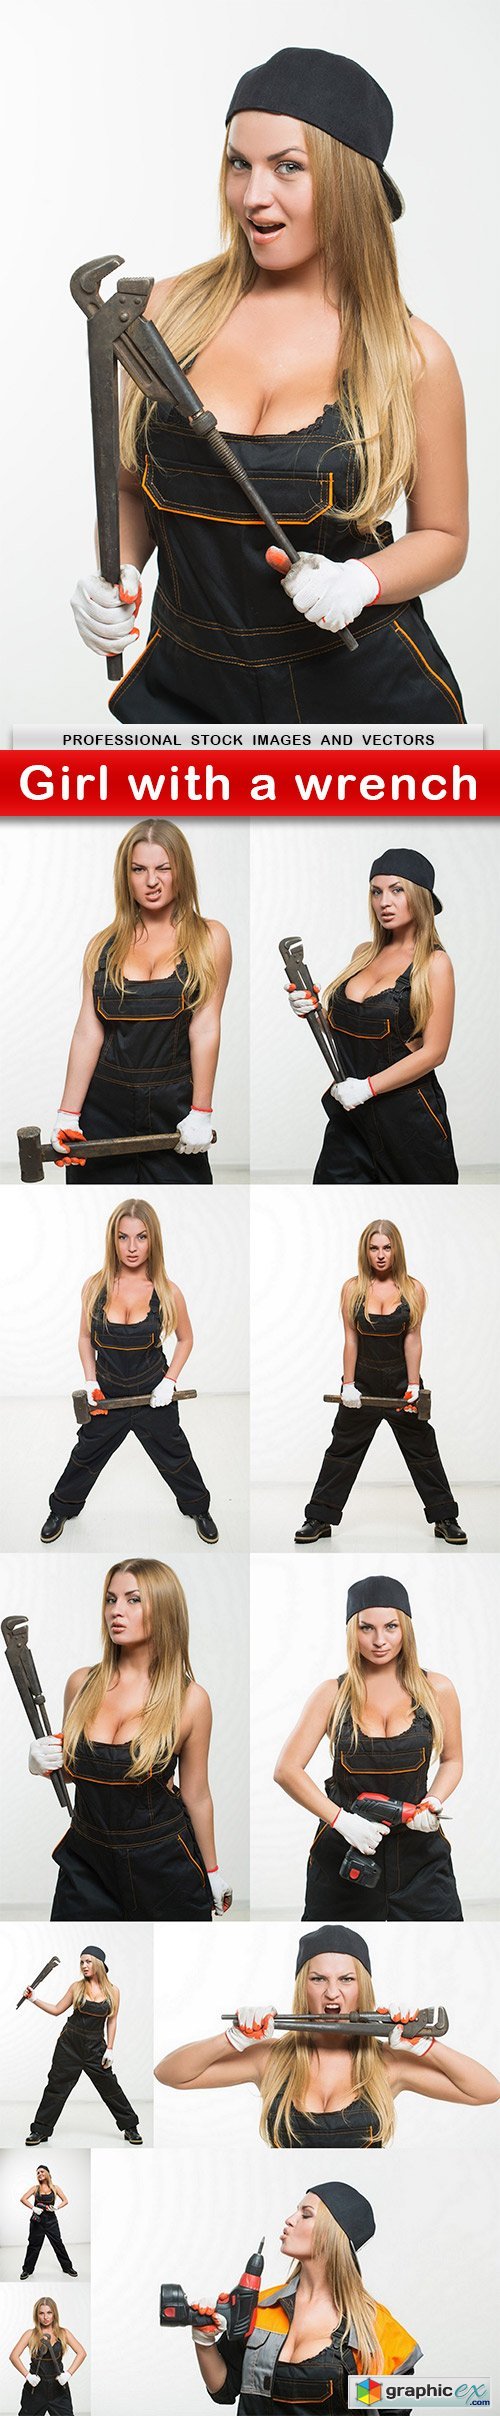 Girl with a wrench - 12 UHQ JPEG